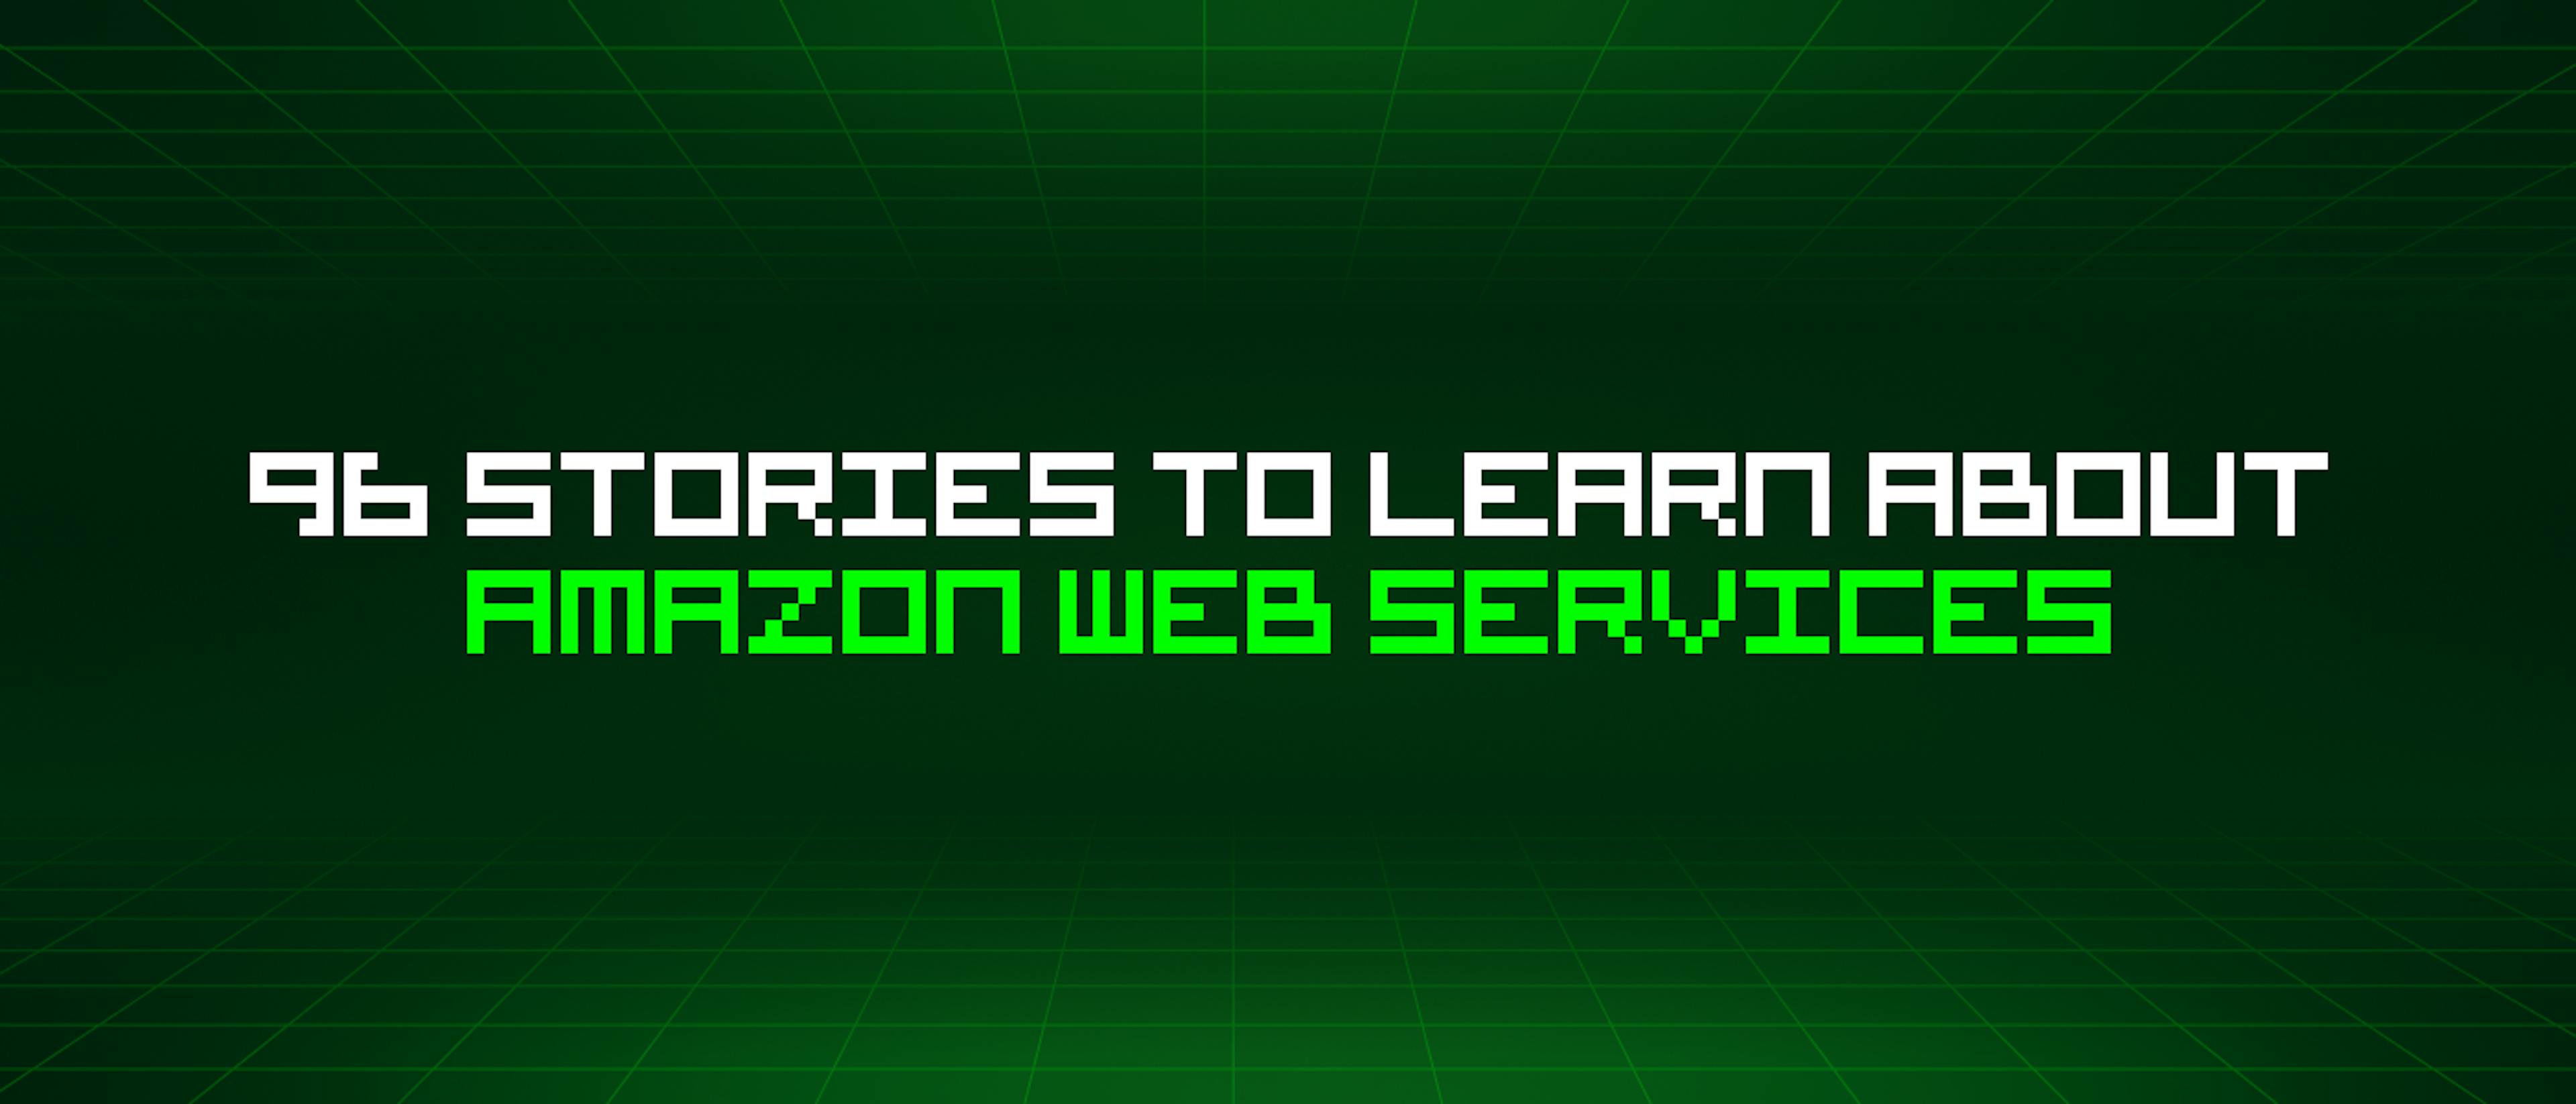 /96-stories-to-learn-about-amazon-web-services feature image